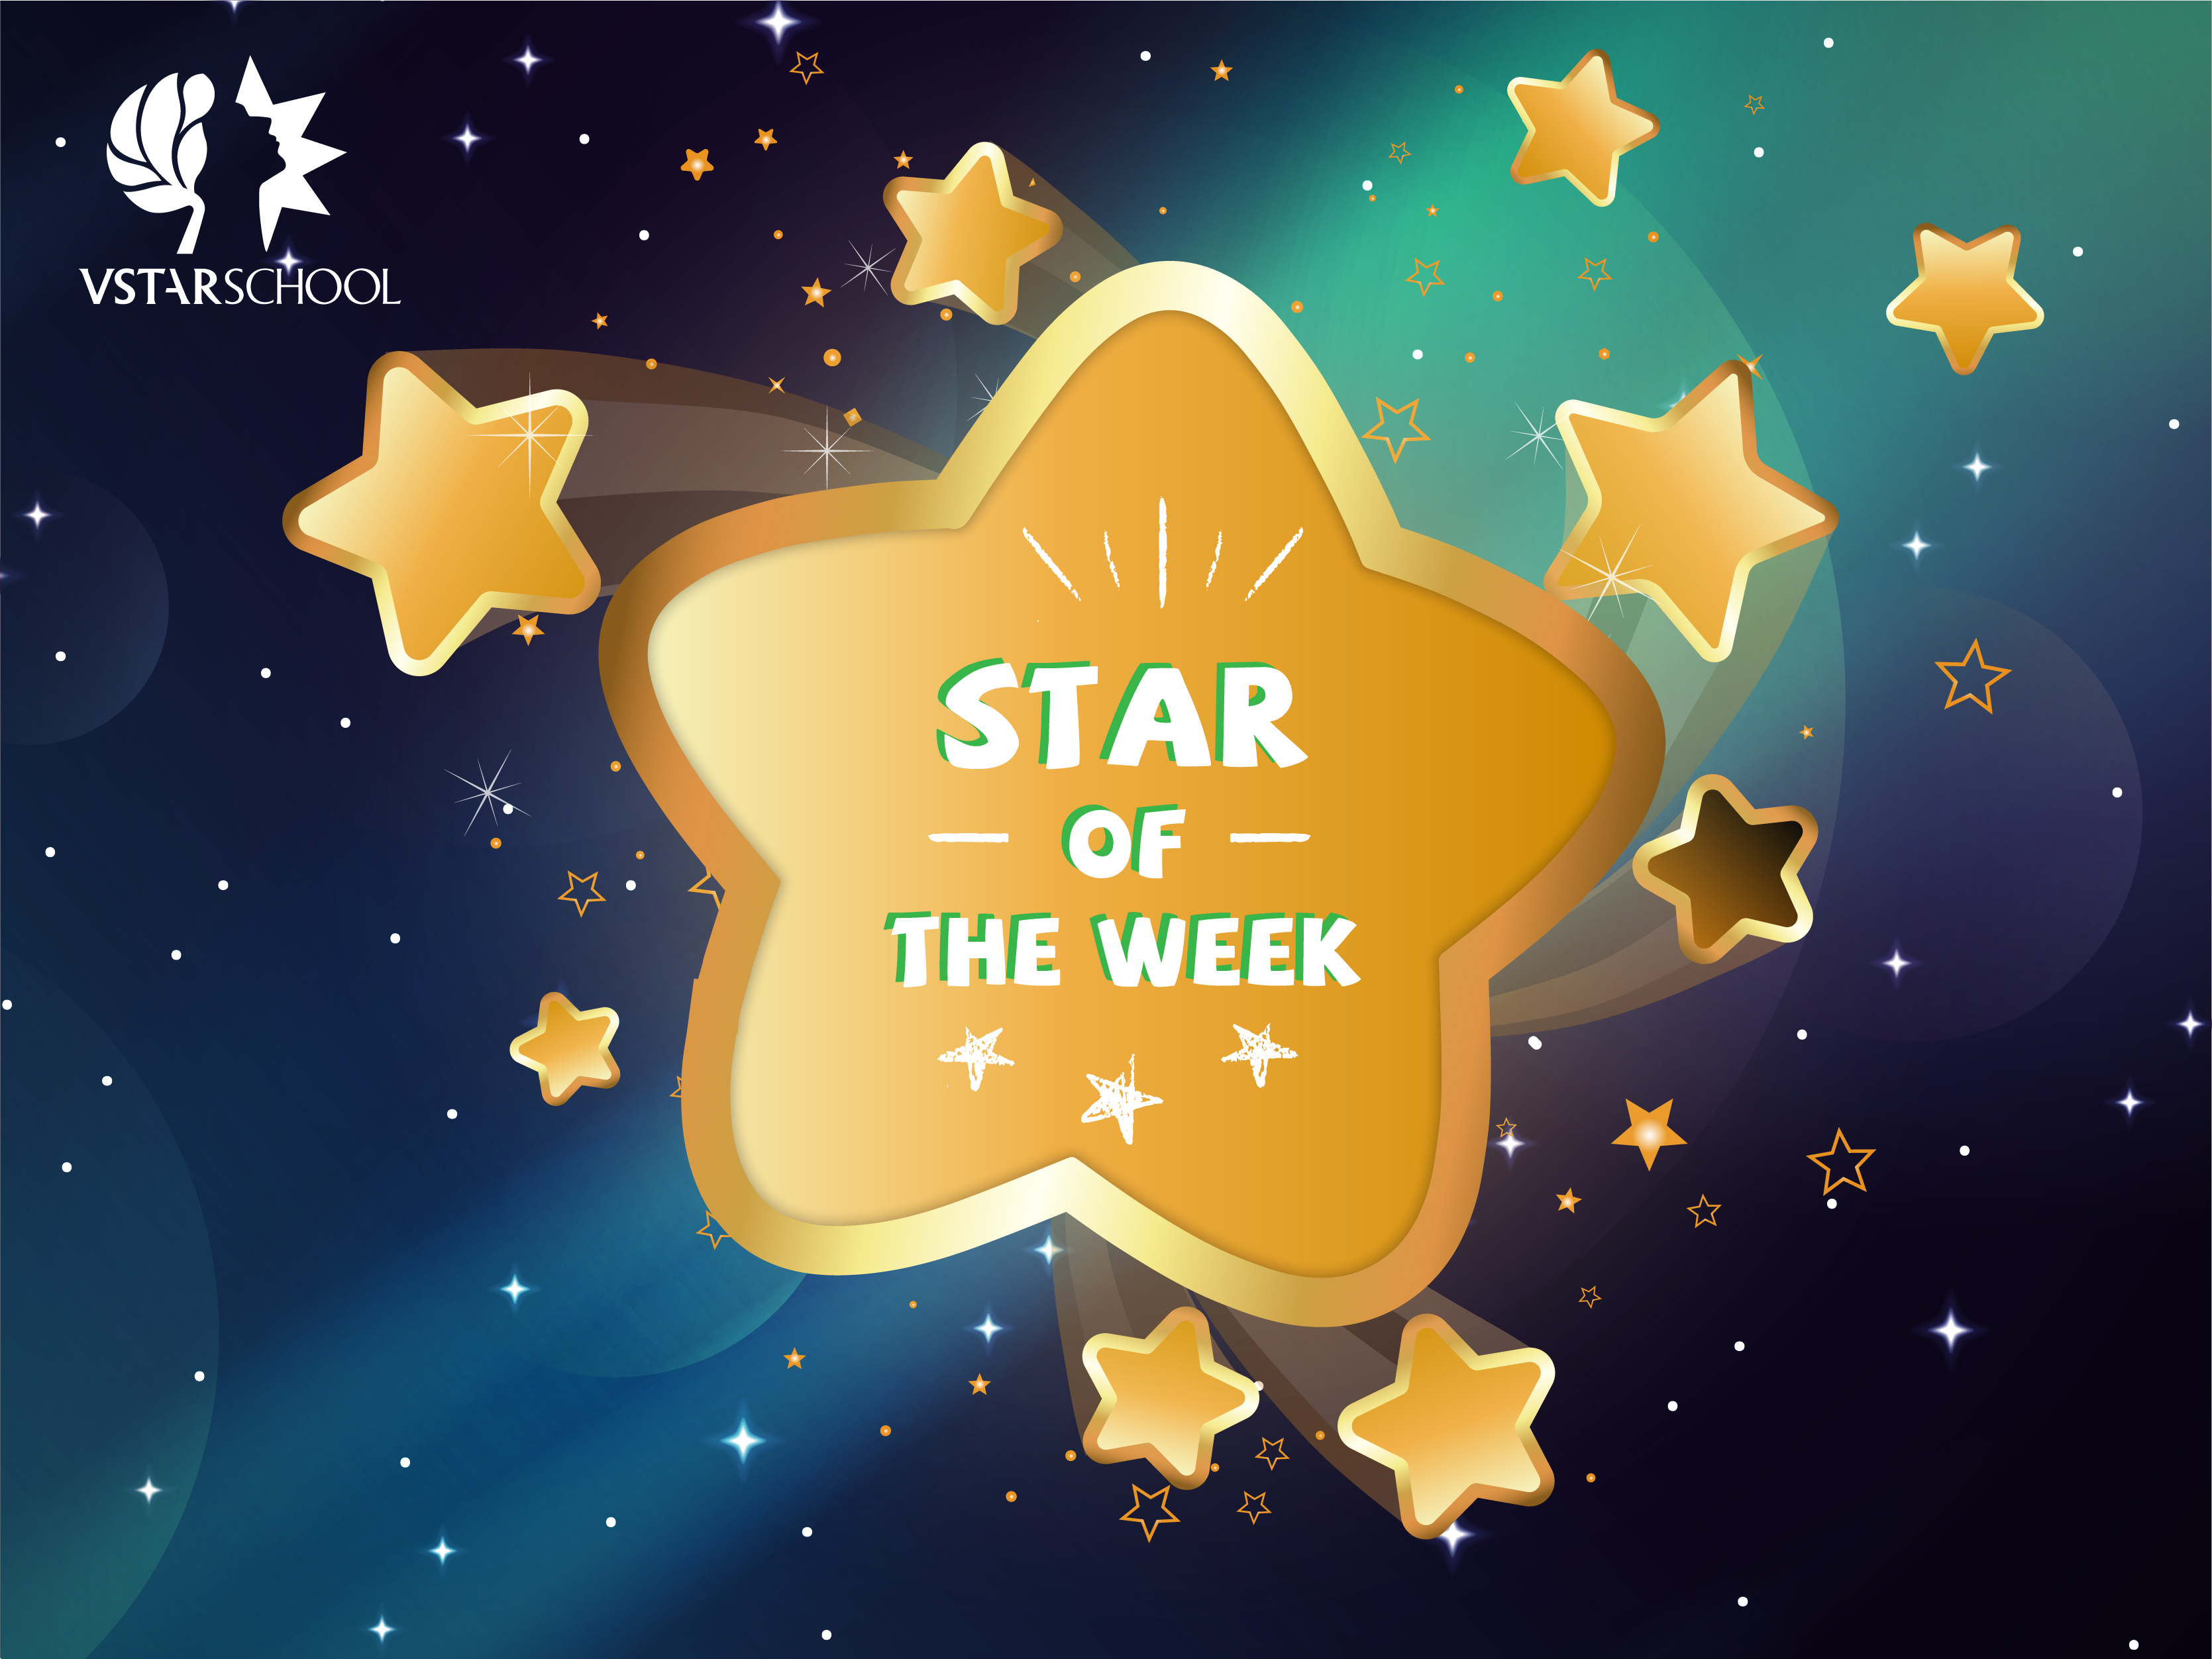 STAR OF THE WEEK TUẦN 4 - 11/2018